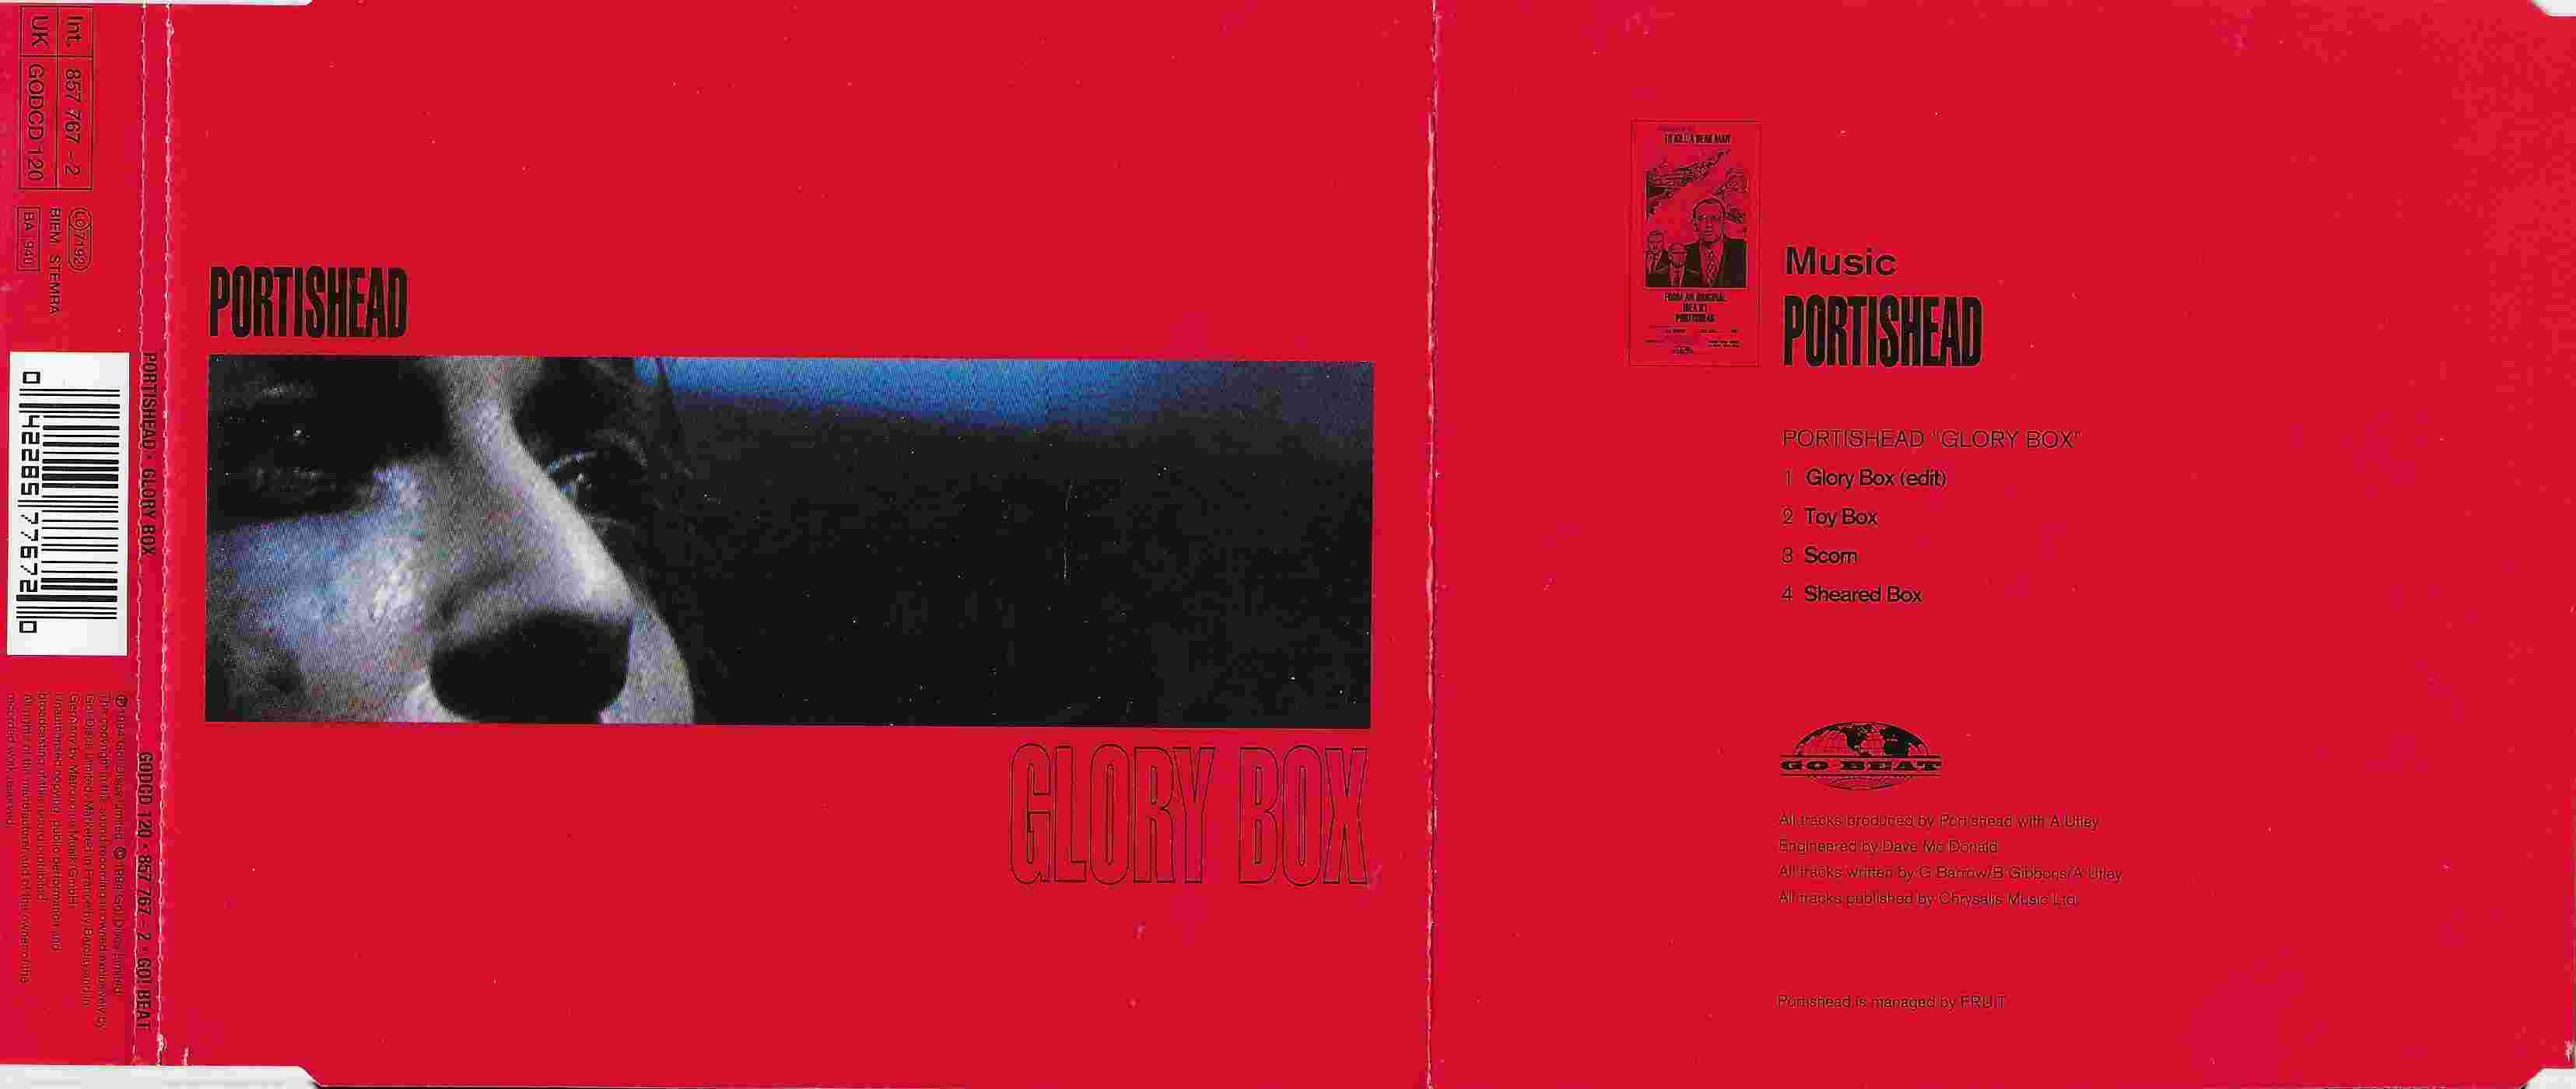 Back cover of GODCD 120